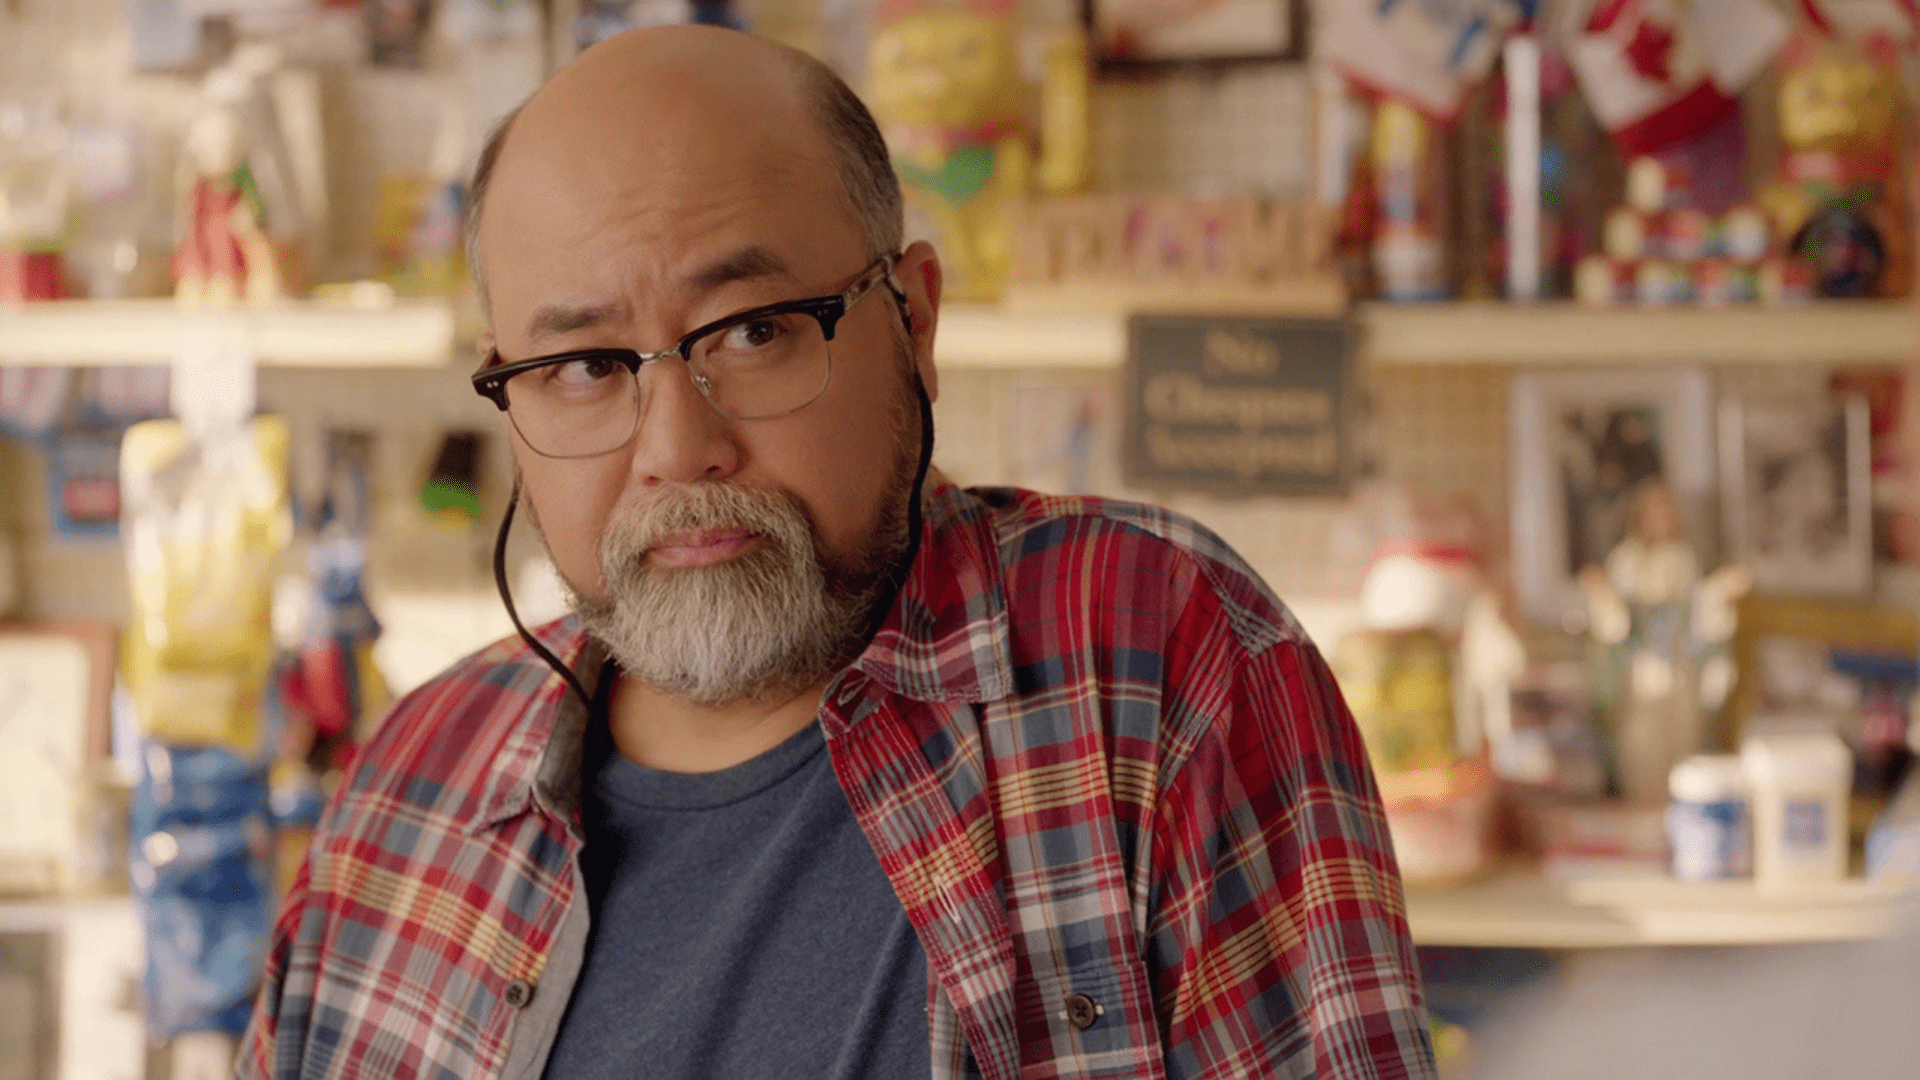 Kim’s Convenience Facts - 26 Kim’s Convenience Facts You Haven't Read Before